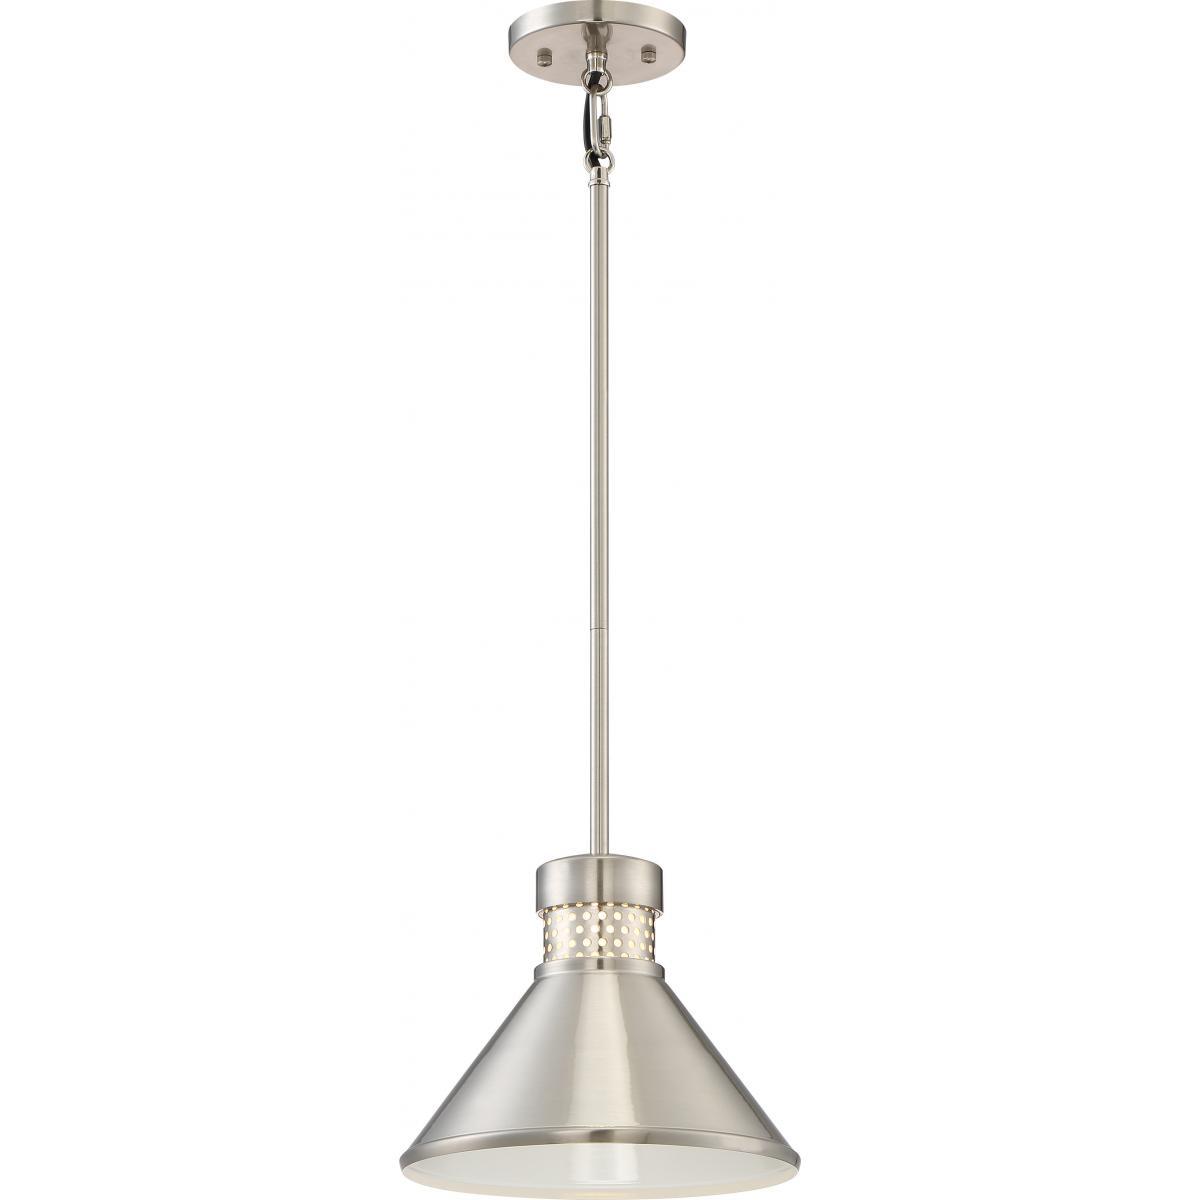 Doral Small LED Pendant Brushed Nickel / White Accent Finish Ceiling Nuvo Lighting 